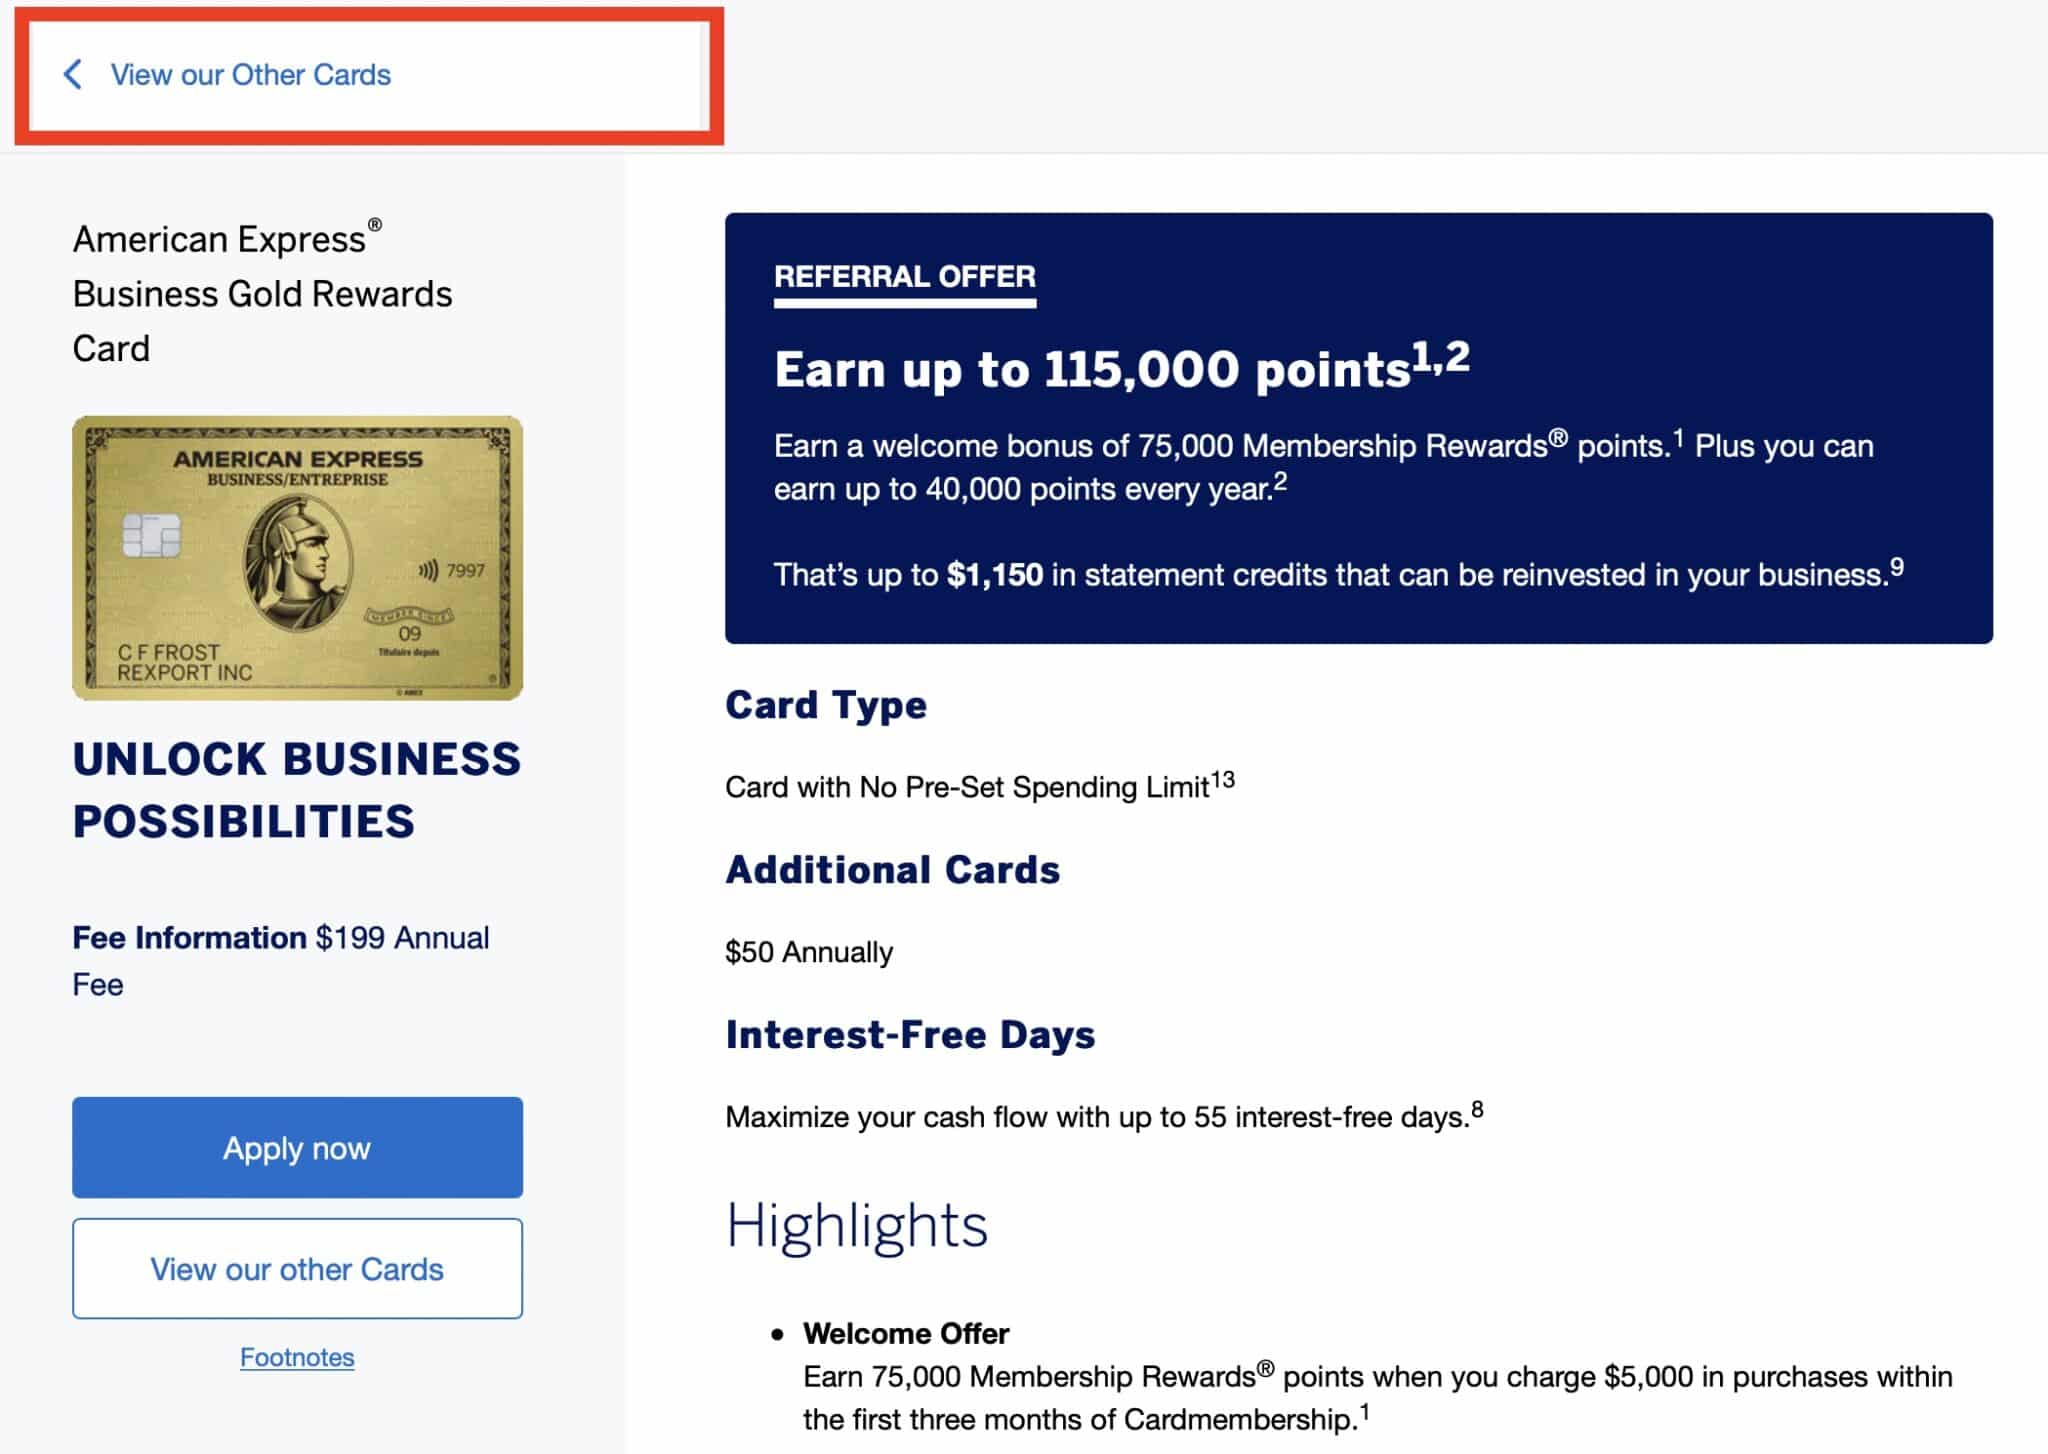 american express canada view other referral card offers